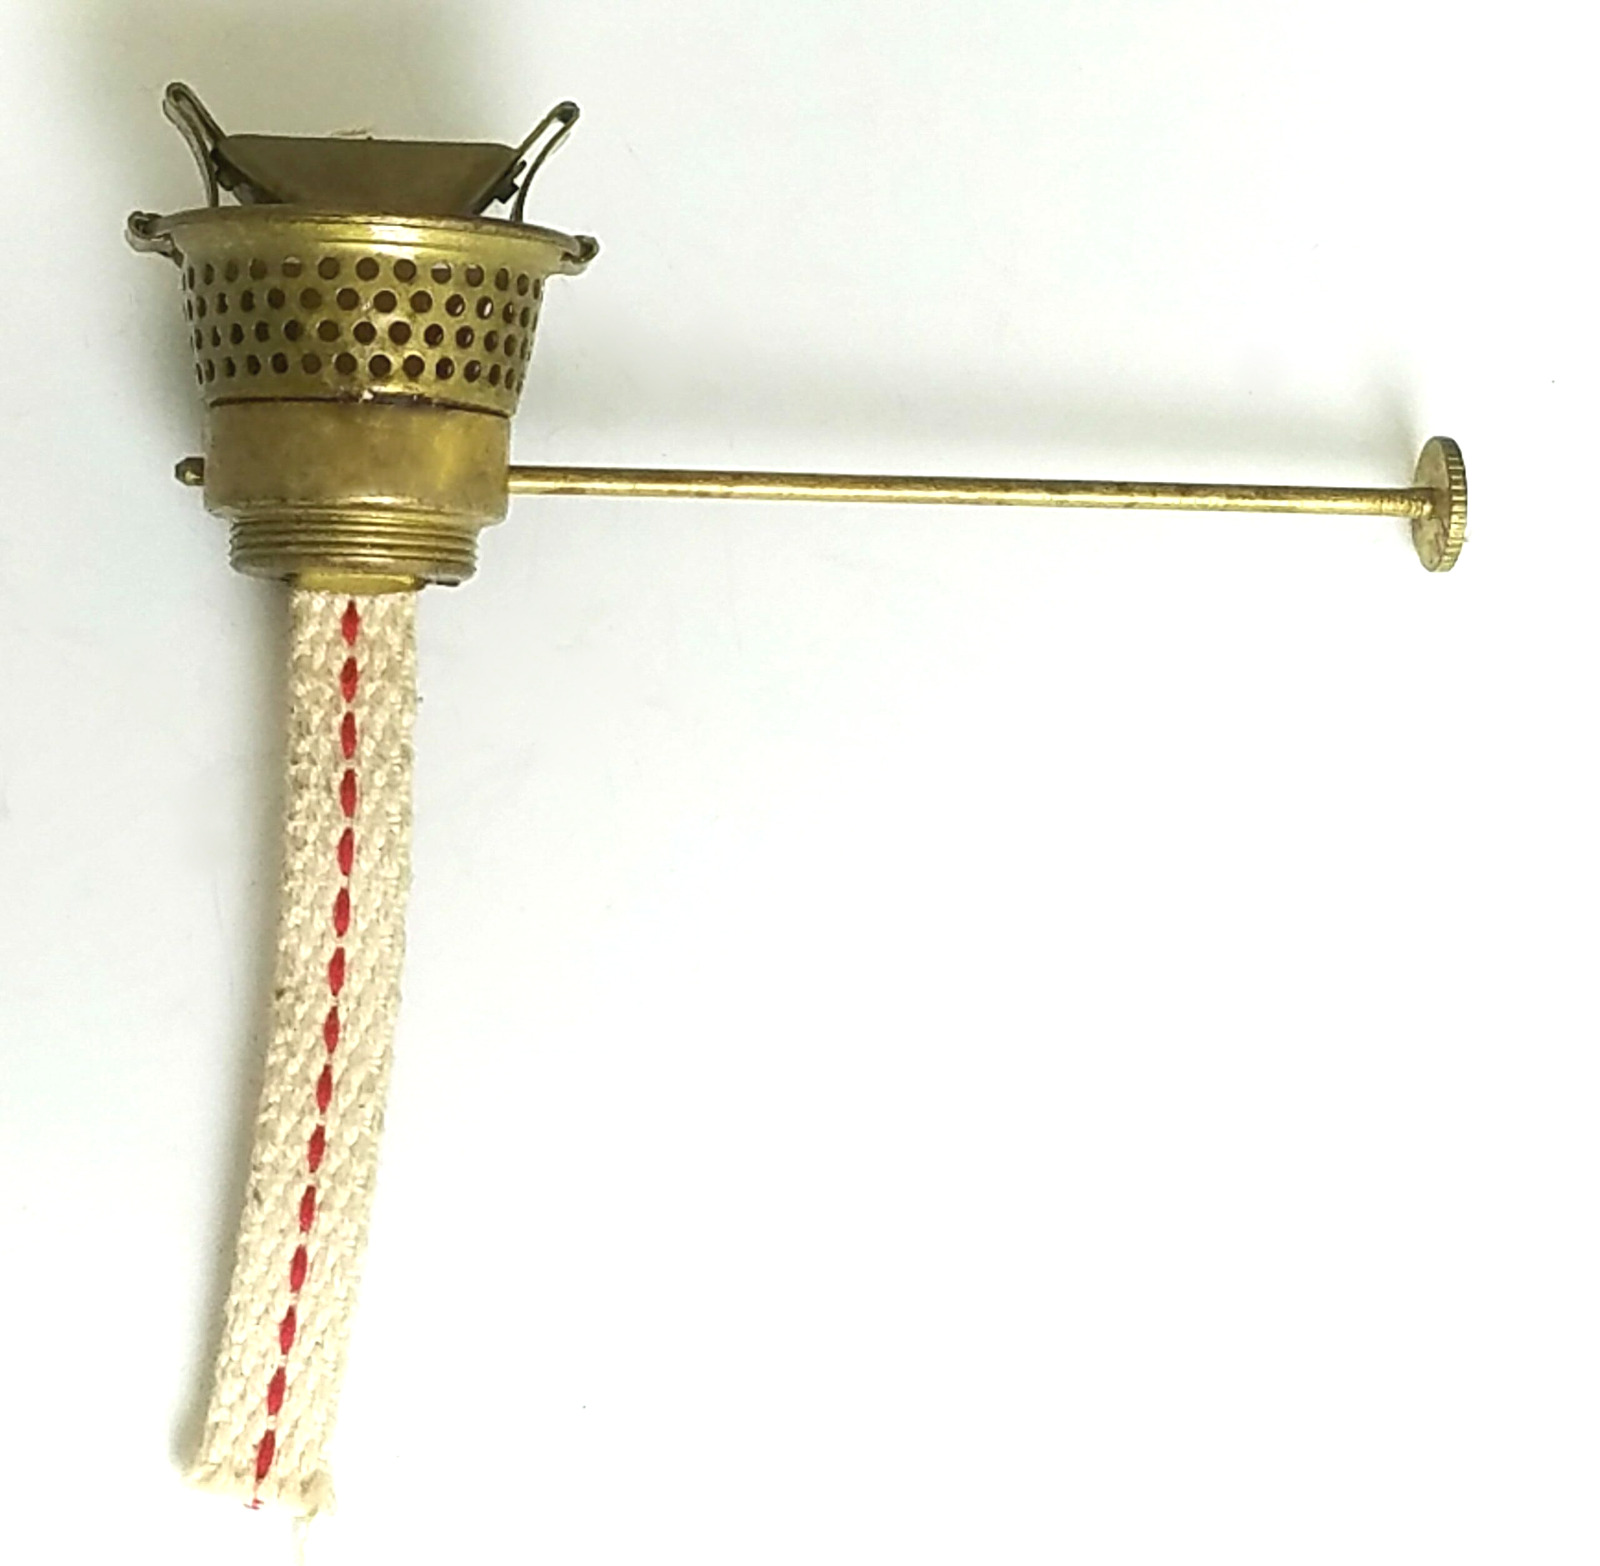 Solid Brass Adlake No.114 Low Signal Lantern Burner with Button Thumb Wheel NOS